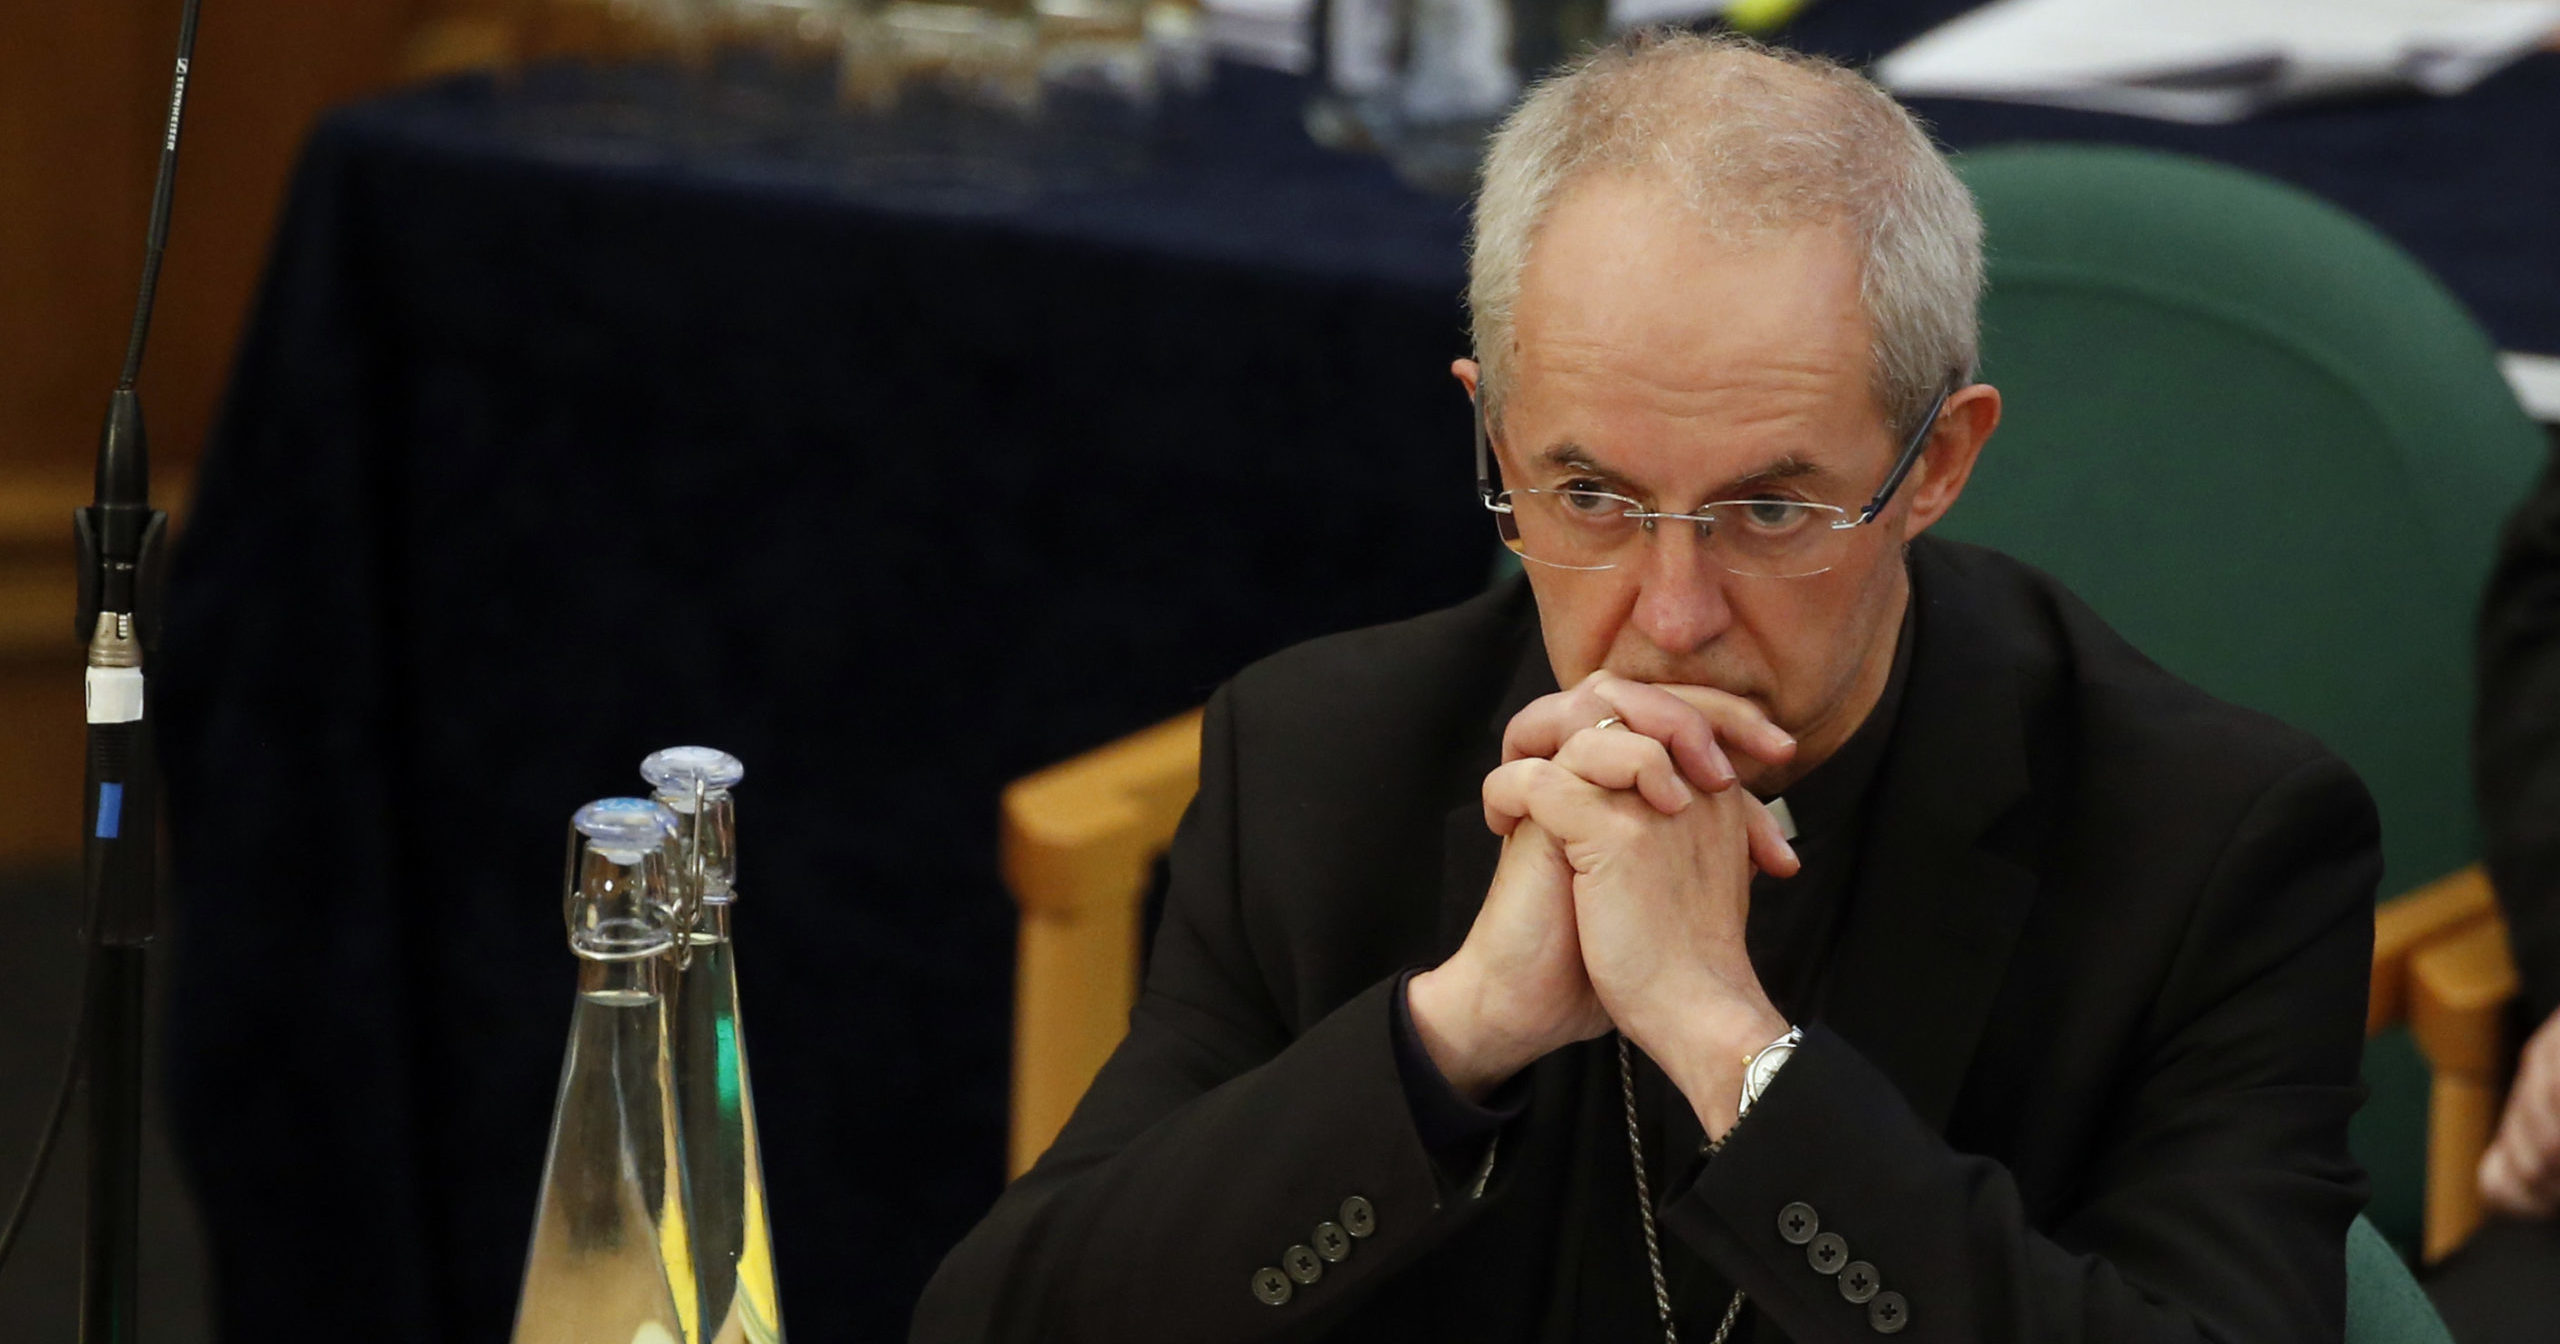 The Archbishop of Canterbury, Justin Welby, listens to debate at the General Synod in London, England, on Feb. 13, 2017.